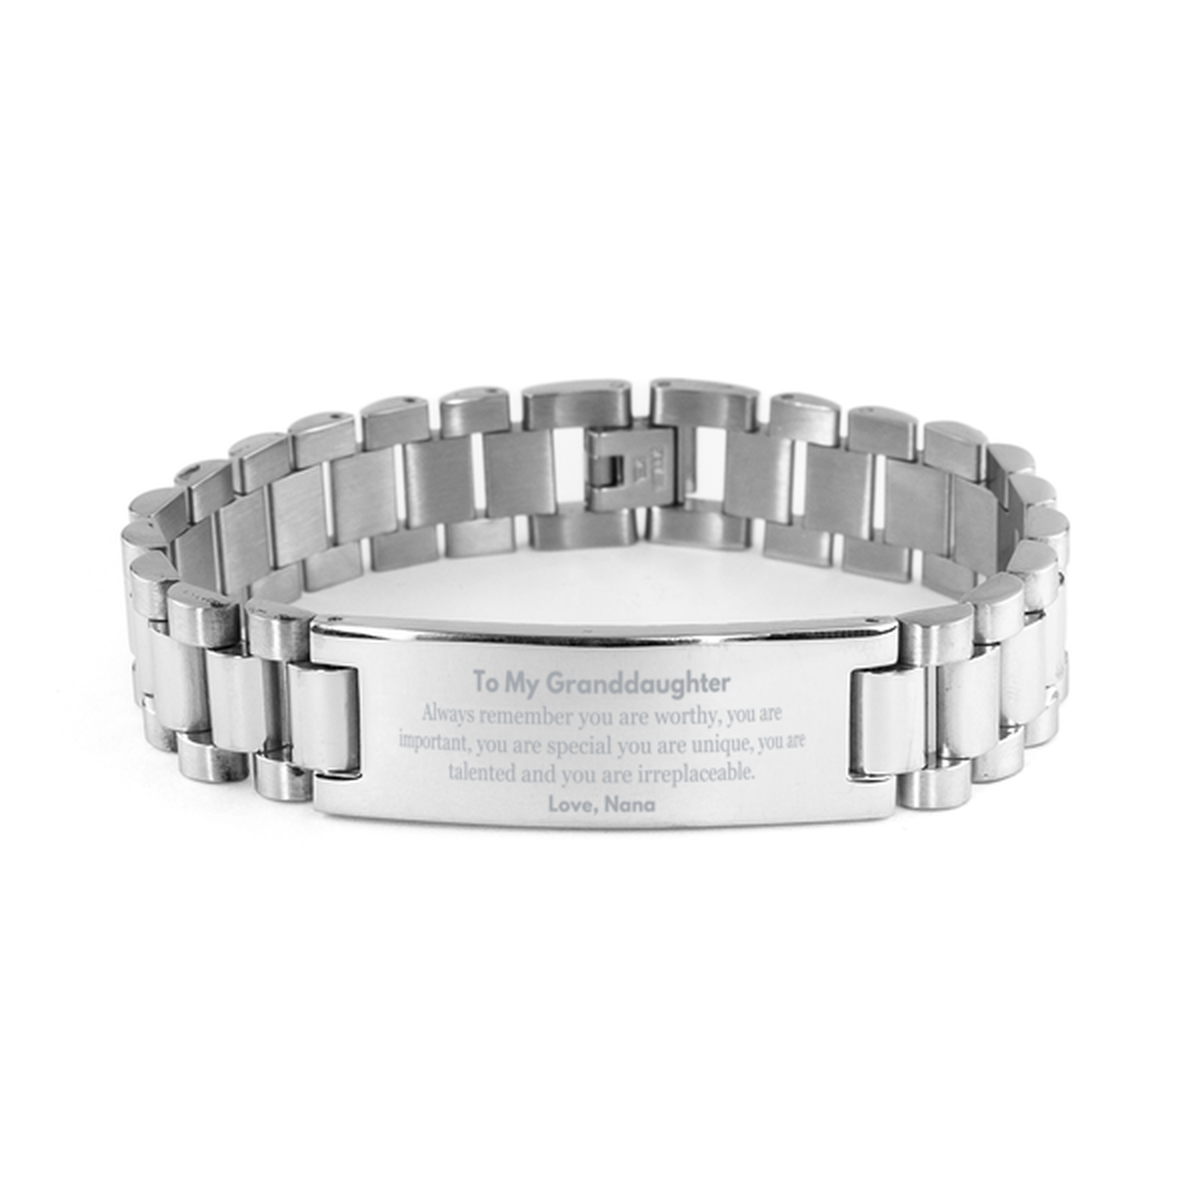 Granddaughter Birthday Gifts from Nana, Inspirational Ladder Stainless Steel Bracelet for Granddaughter Christmas Graduation Gifts for Granddaughter Always remember you are worthy, you are important. Love, Nana